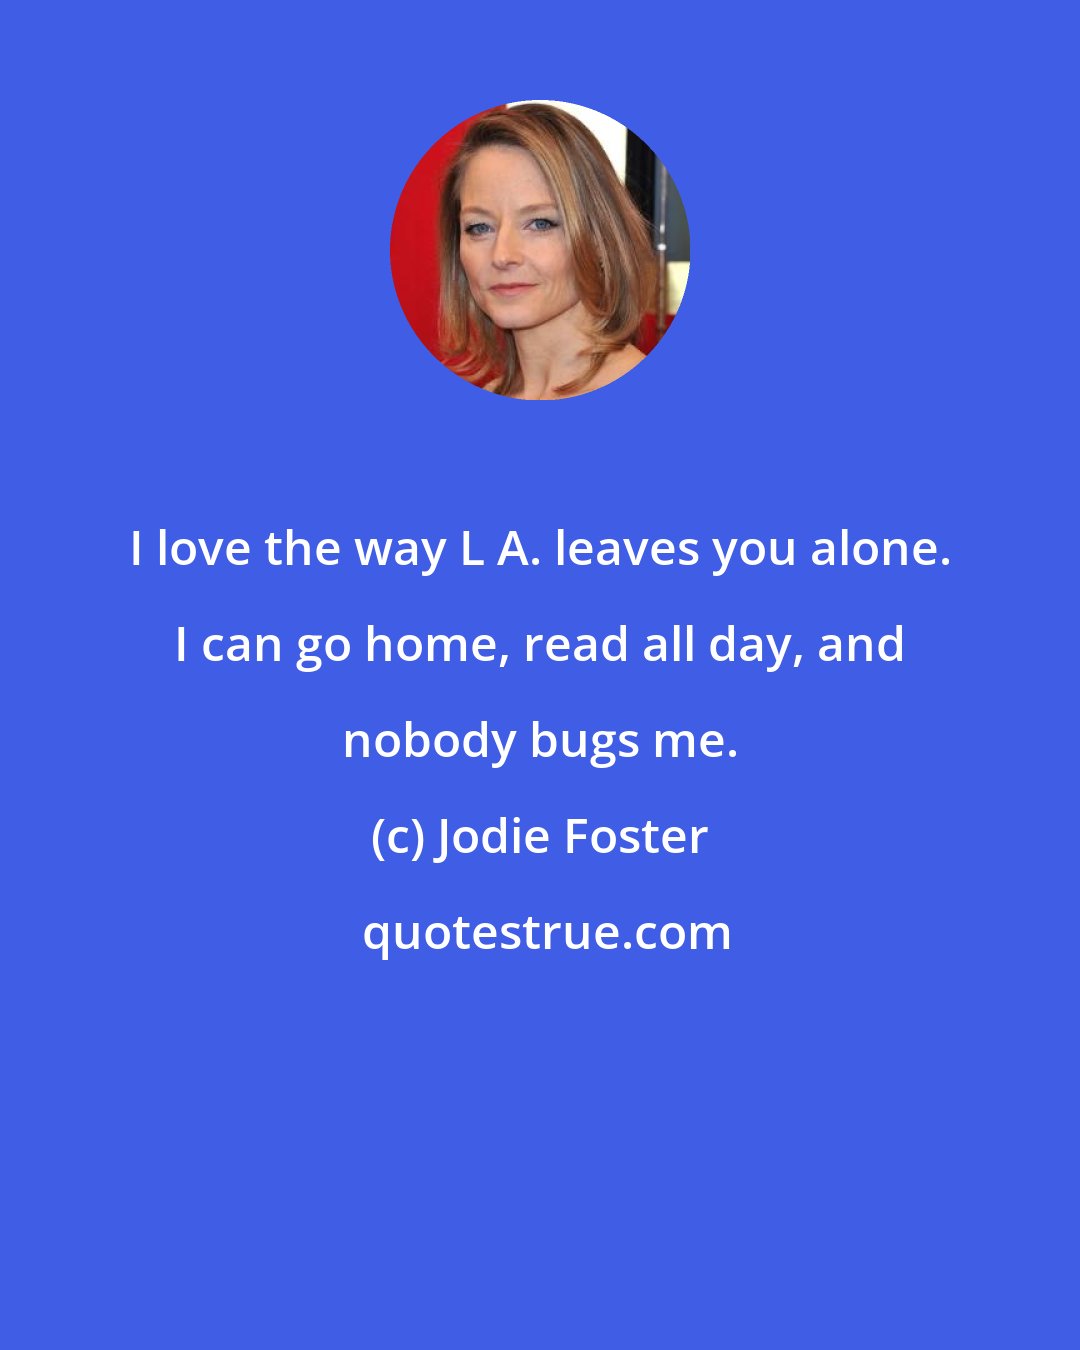 Jodie Foster: I love the way L A. leaves you alone. I can go home, read all day, and nobody bugs me.